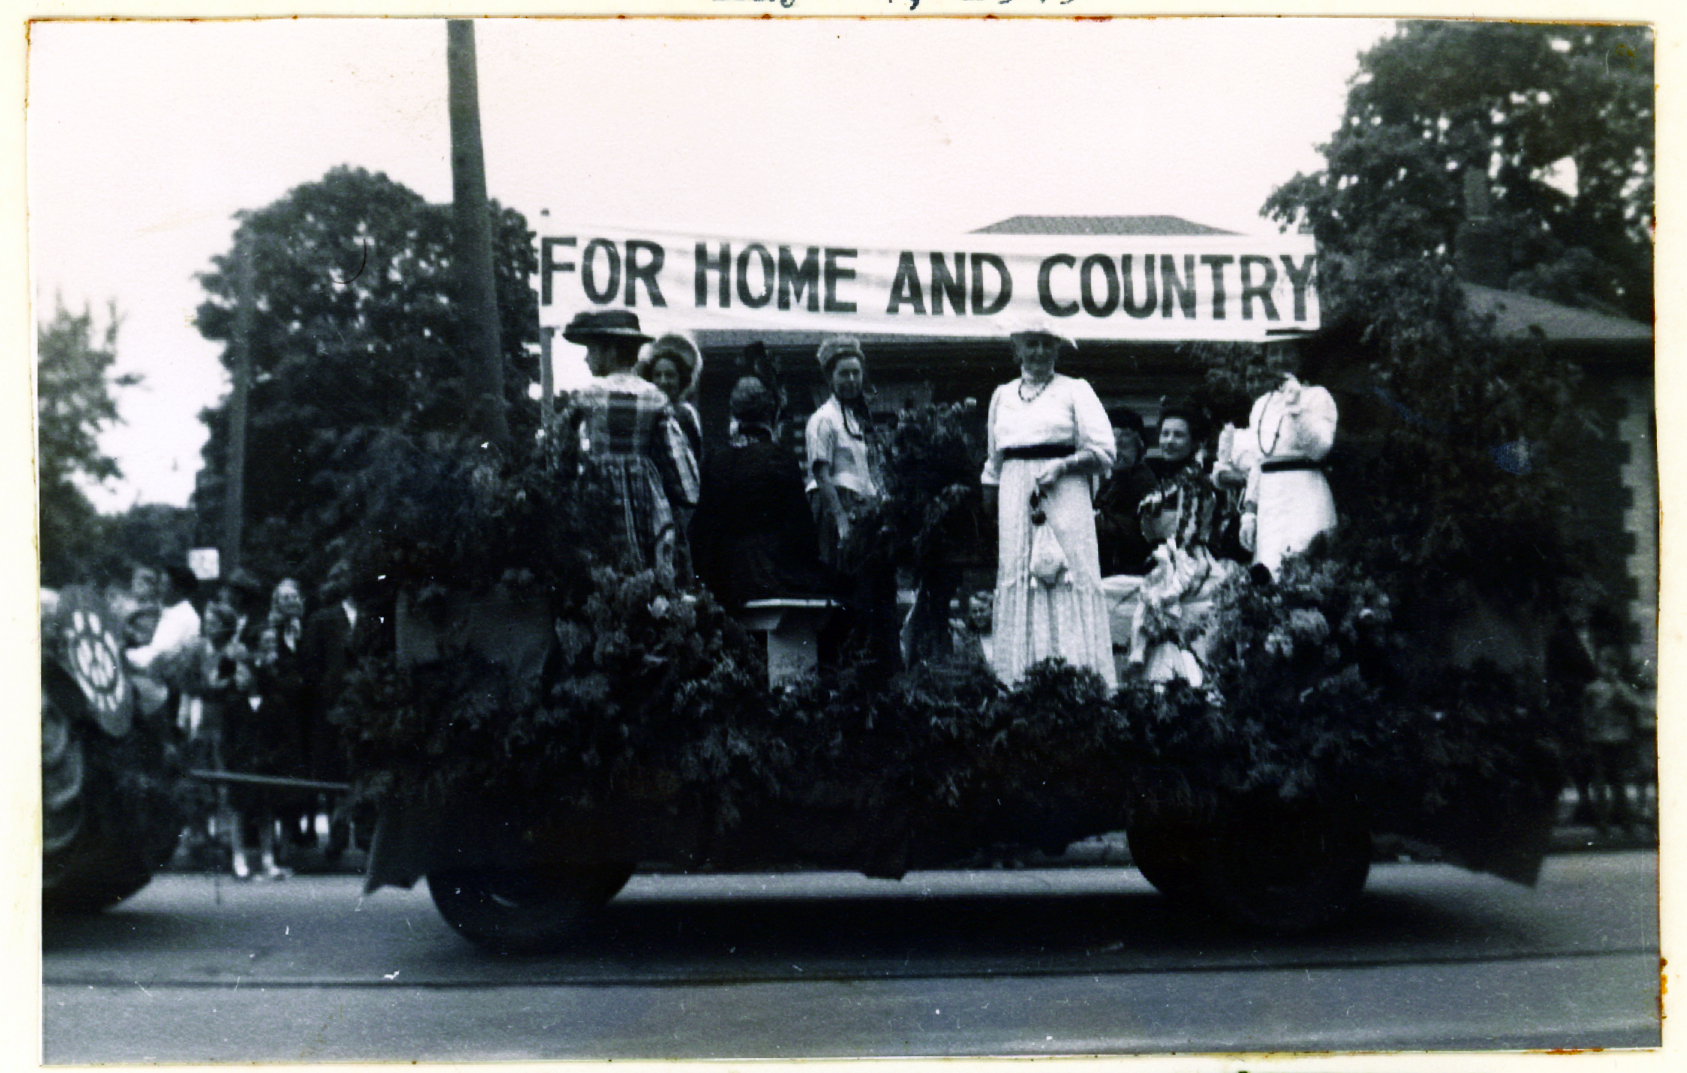 Richmond Hill Women's Institute float during parade to commemorate the 100th anniversary of the Richmond Hill Agricultural Society, May 24, 1949. (Richmond Hill Public Library, Tweedsmuir History Fonds, 080a)